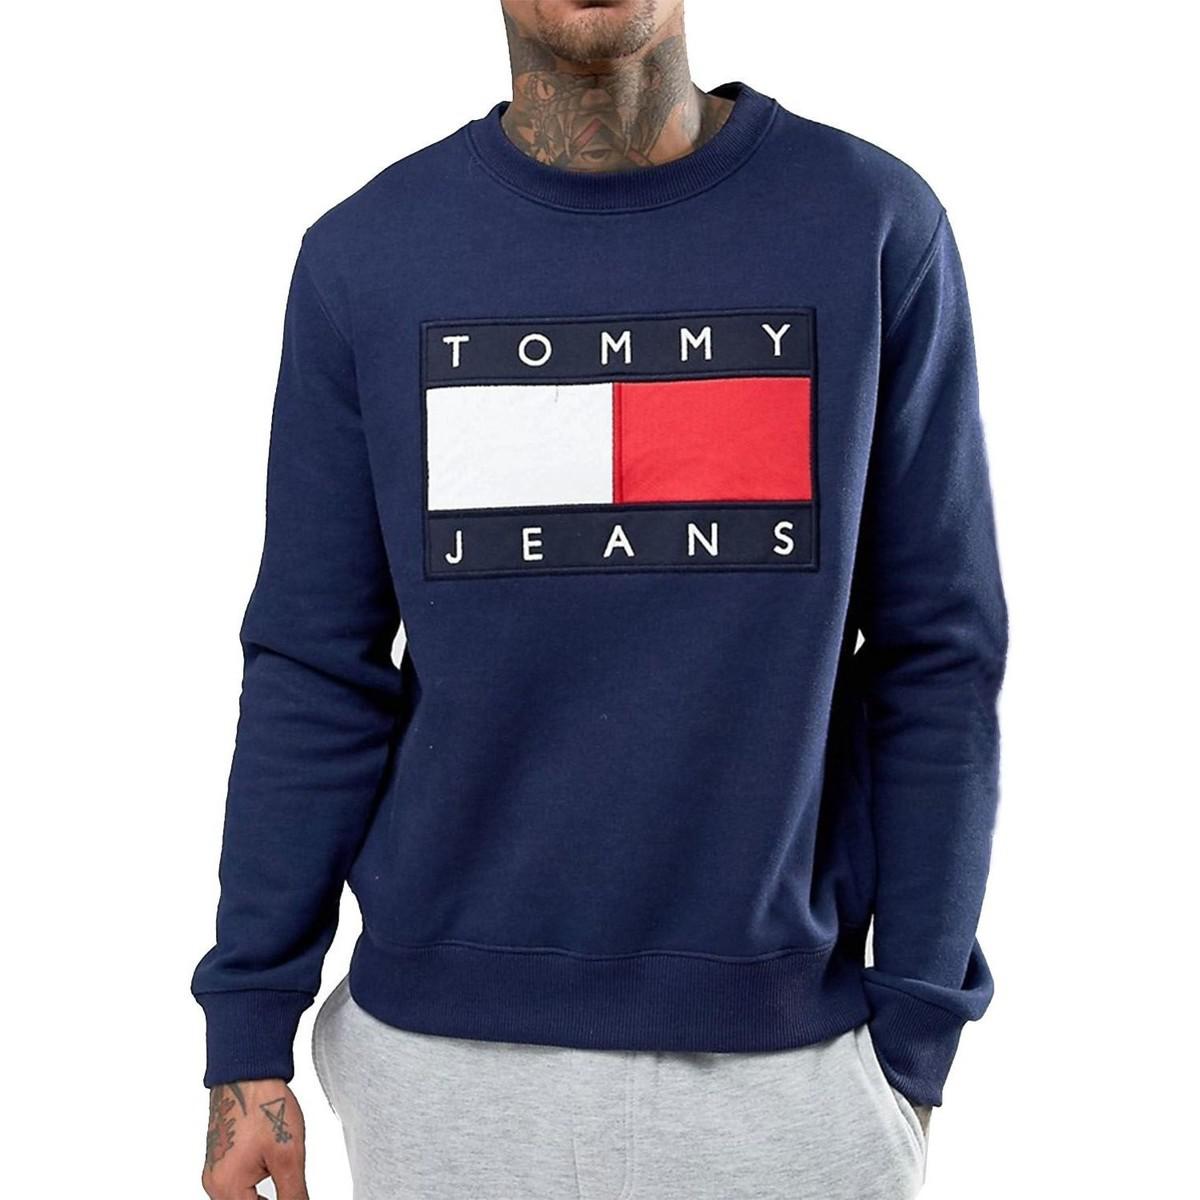 Tommy Jeans Sweatshirt Sale Online Sale, UP TO 62% OFF